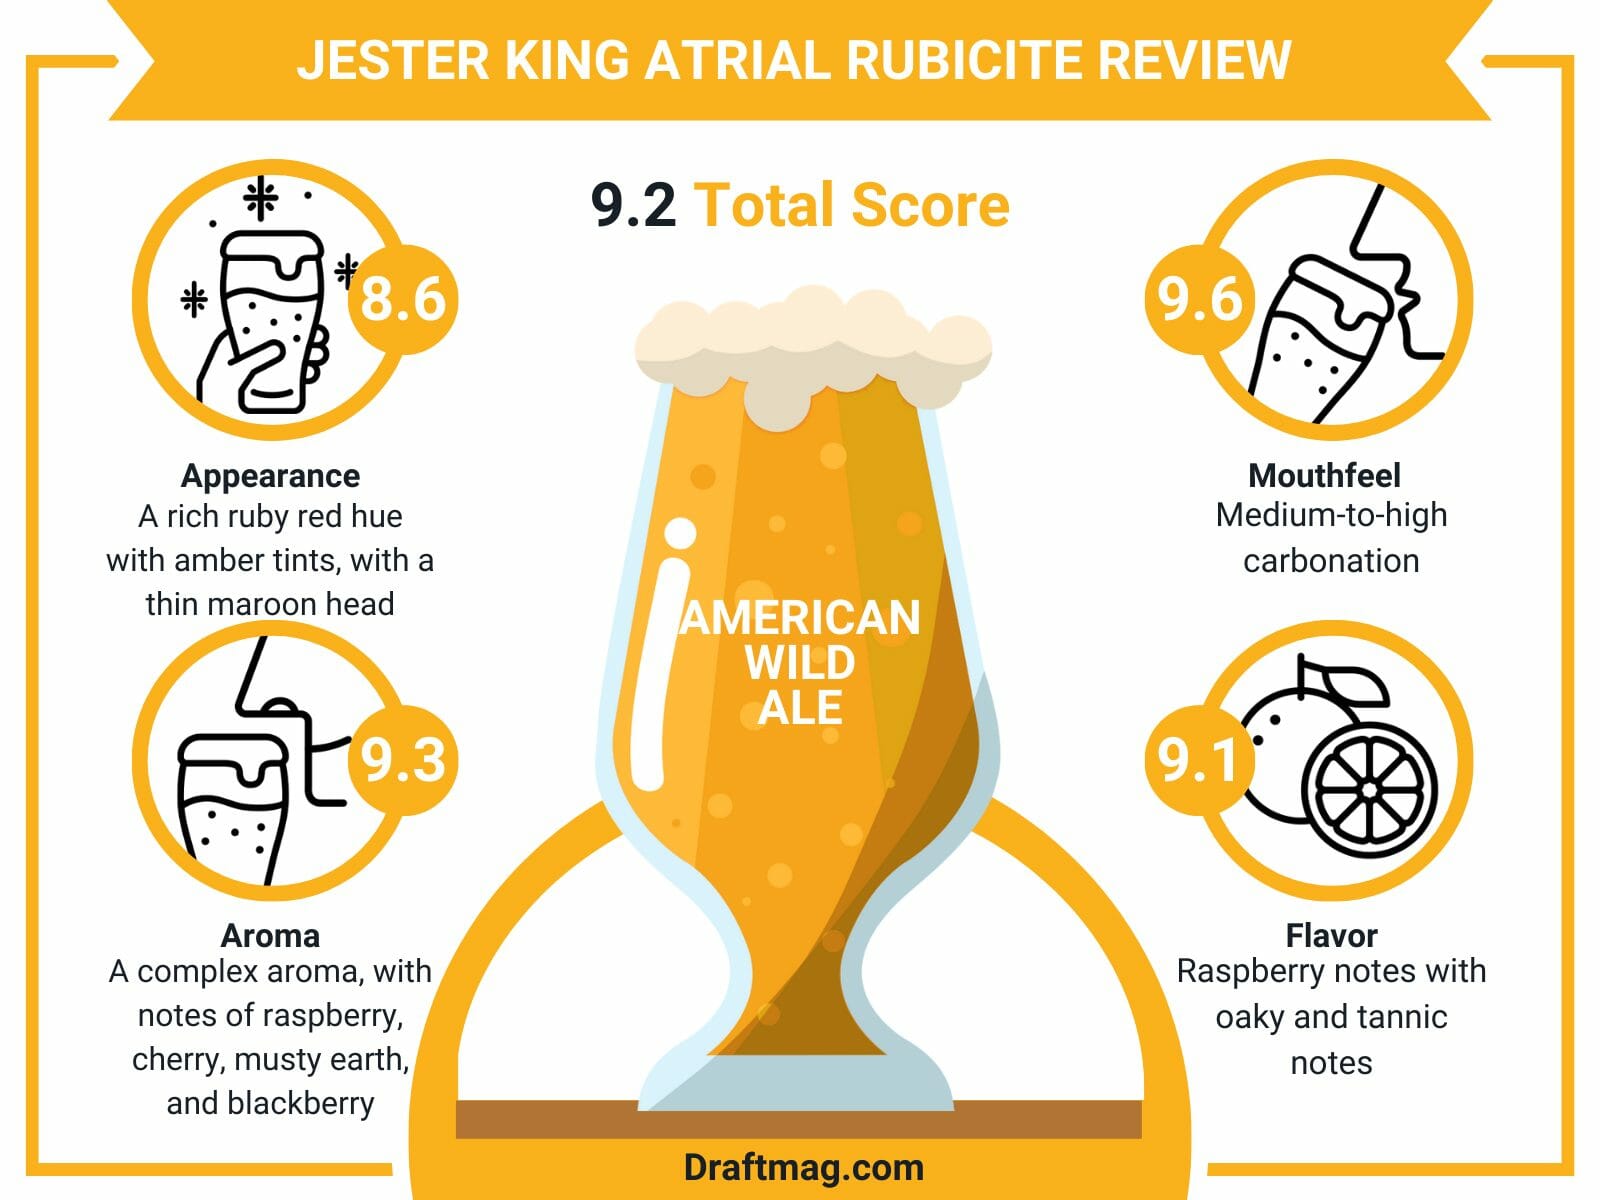 Jester king atrial rubicite review infographic